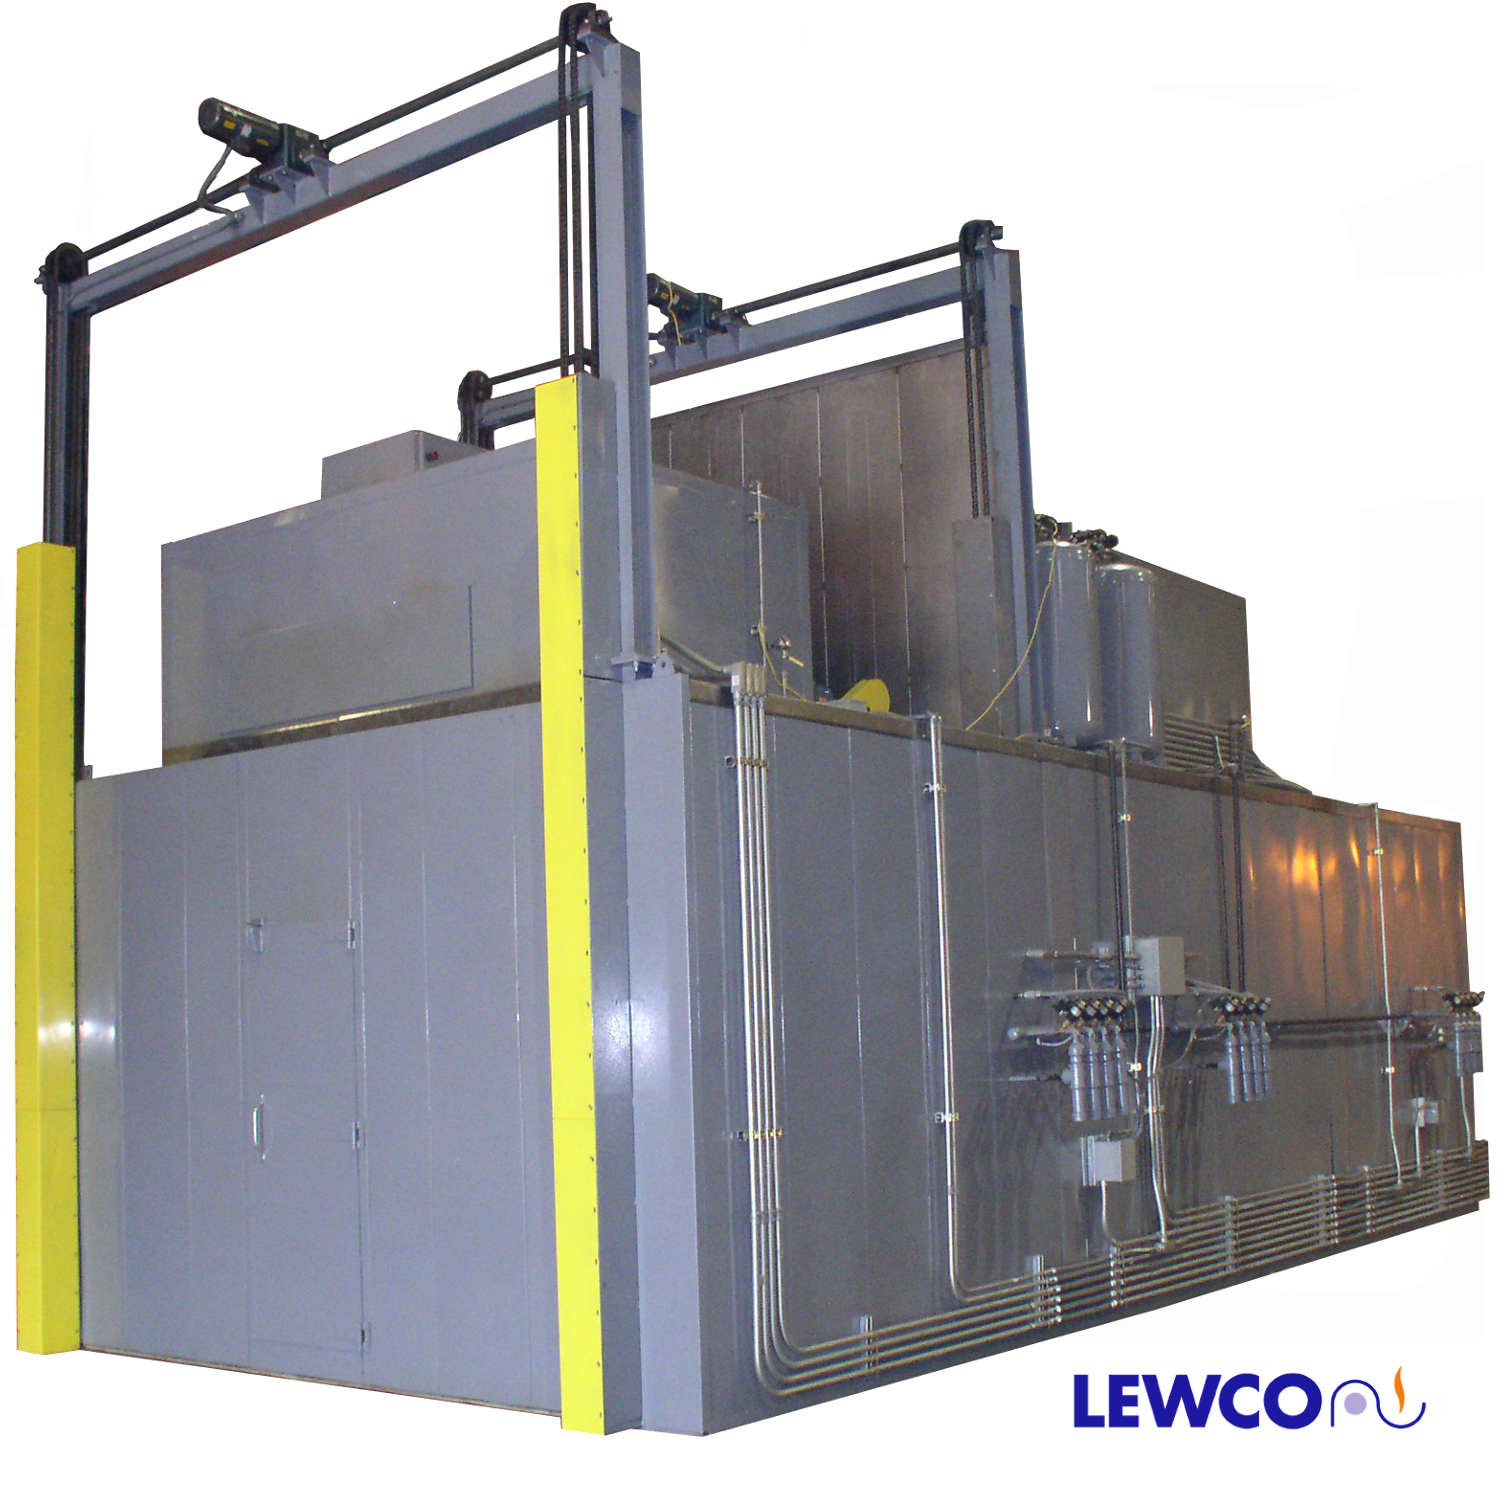 https://ovens.lewcoinc.com/wp-content/uploads/2020/05/dual-chamber-composite-curing-oven-door-closed-large.png